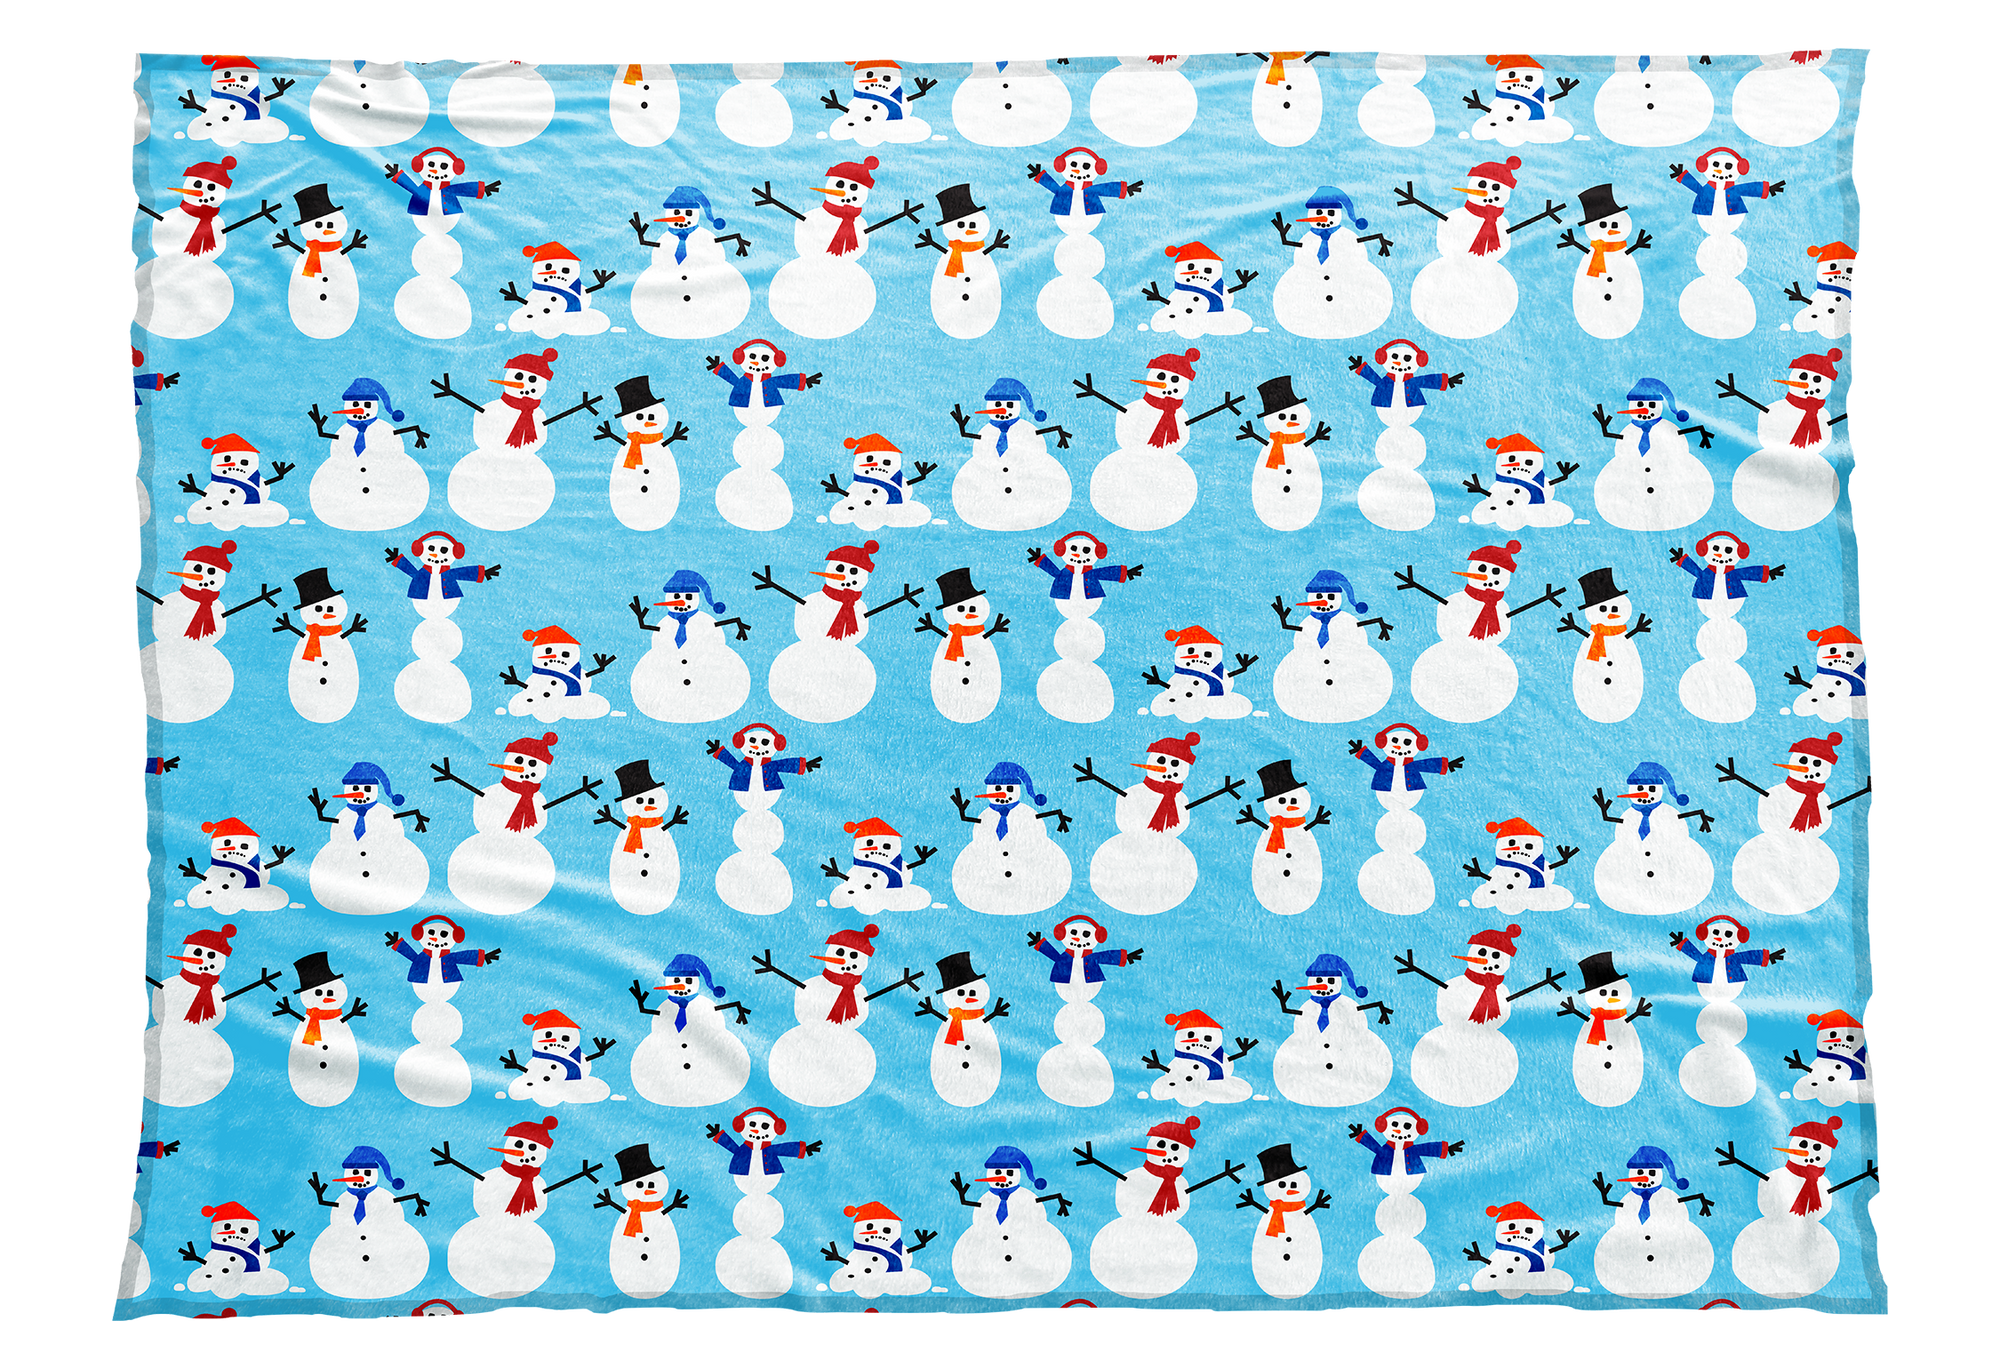 Snowmen are a fun and whimsical symbol of the winter season. So whether you are in Alaska or Arizona this winter try cuddling up in a cozy blanket decorated with happy snowmen against a bright blue background. Also available with lime green and gray backgrounds.